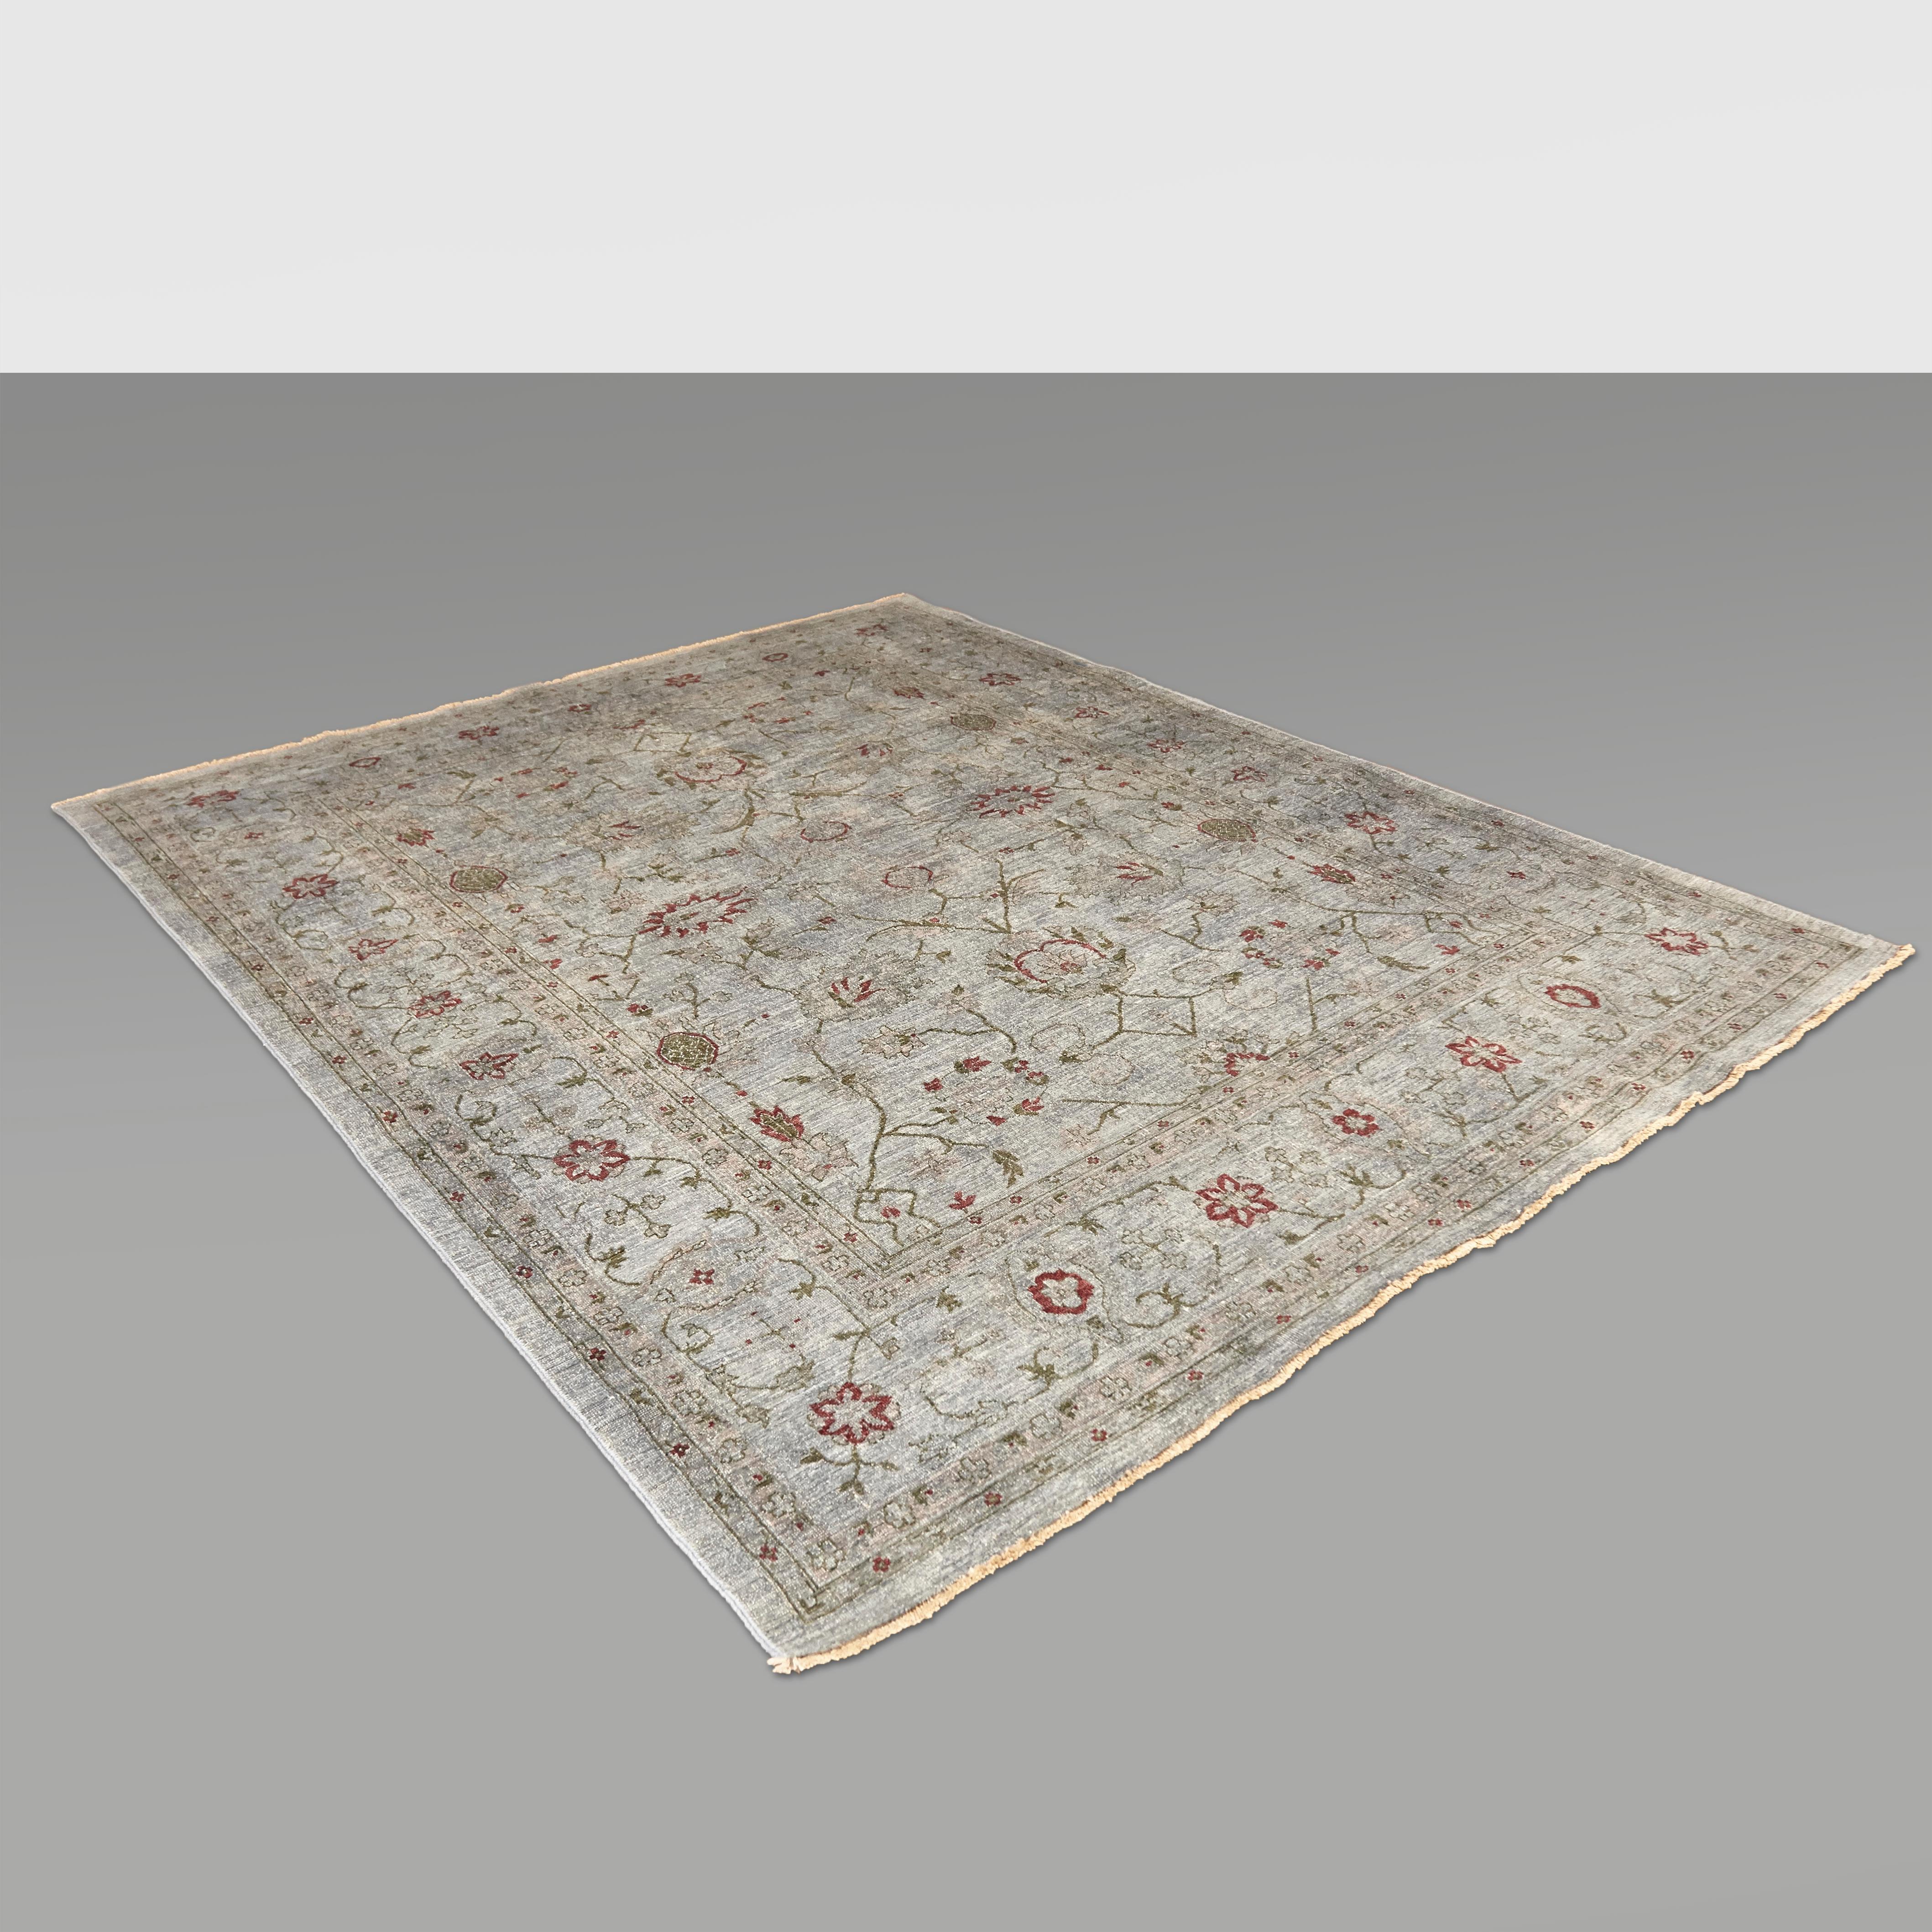 Ziegler Pakistan Large Rug Stone Washed, Wool Hand Knotted Grey Red, circa 2000 13